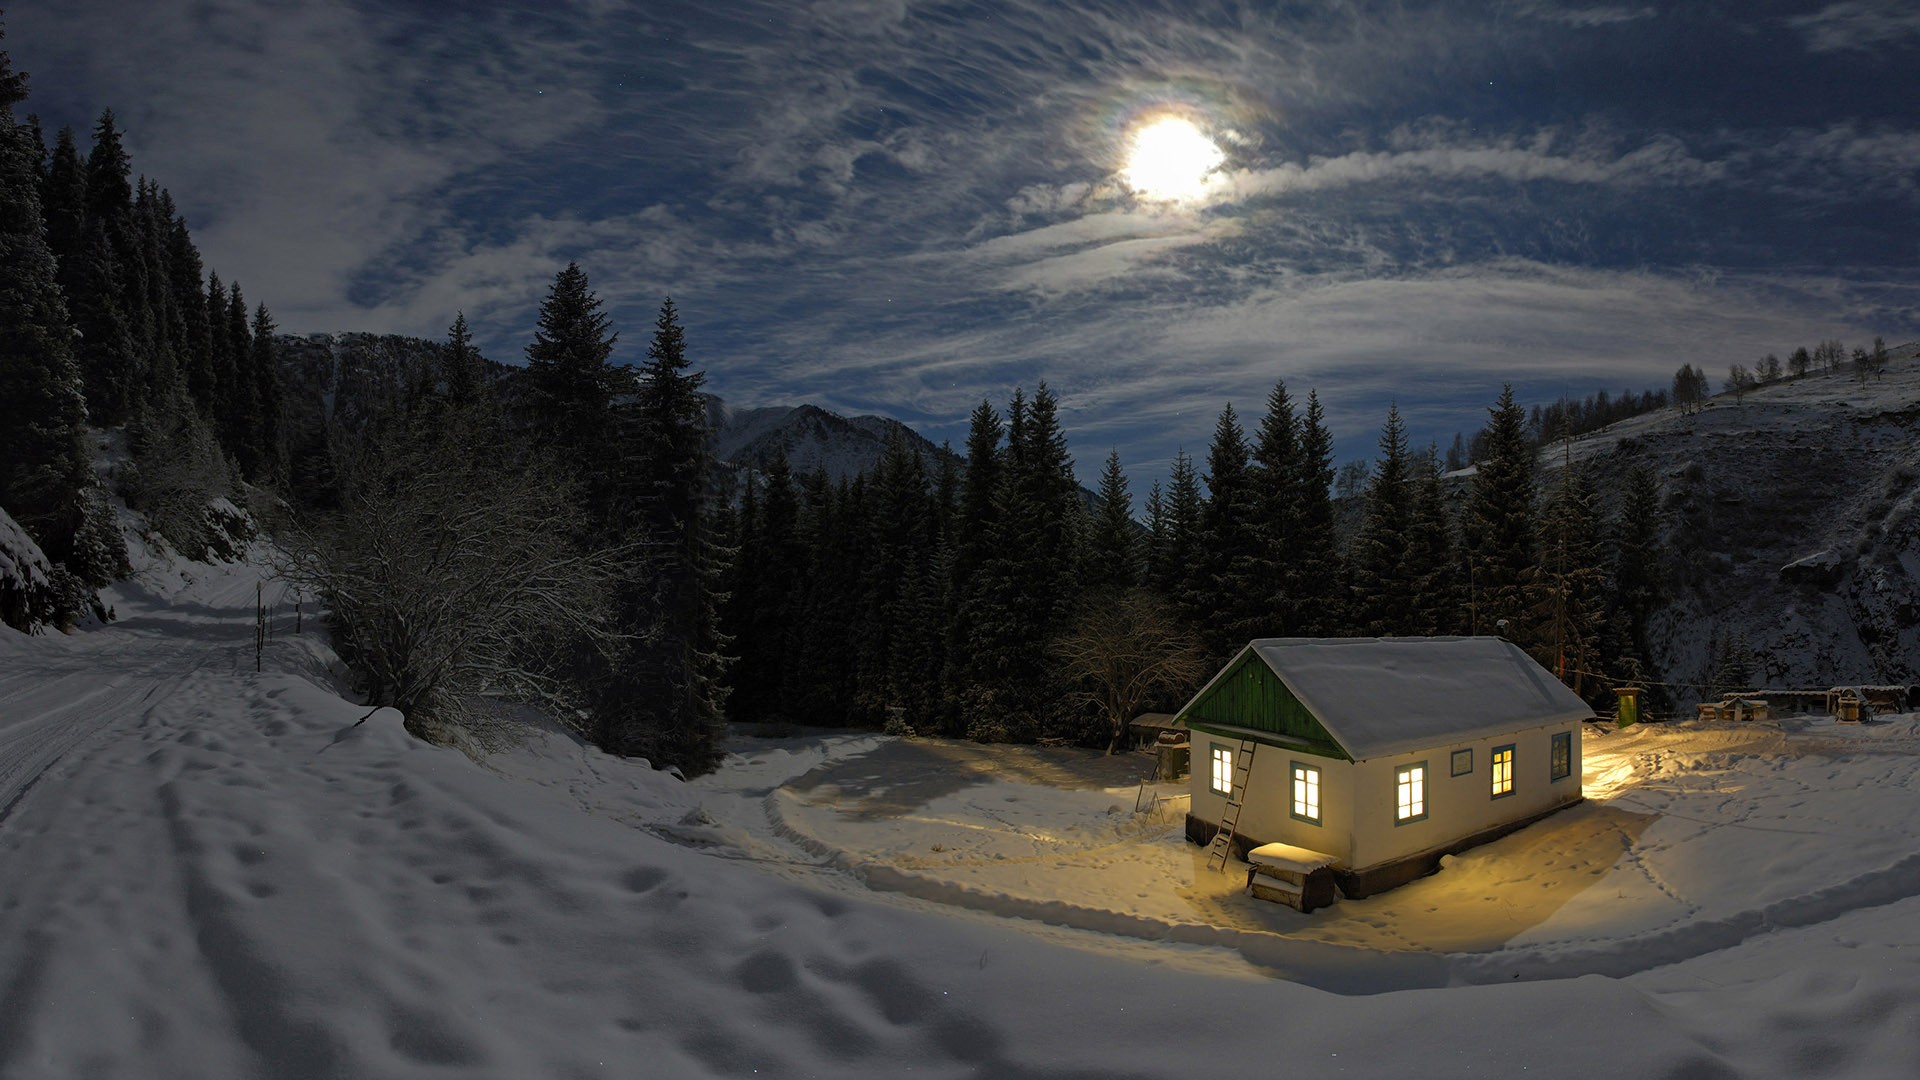 General 1920x1080 nature landscape night Moon moonlight mountains winter snow trees forest house lights clouds rocks